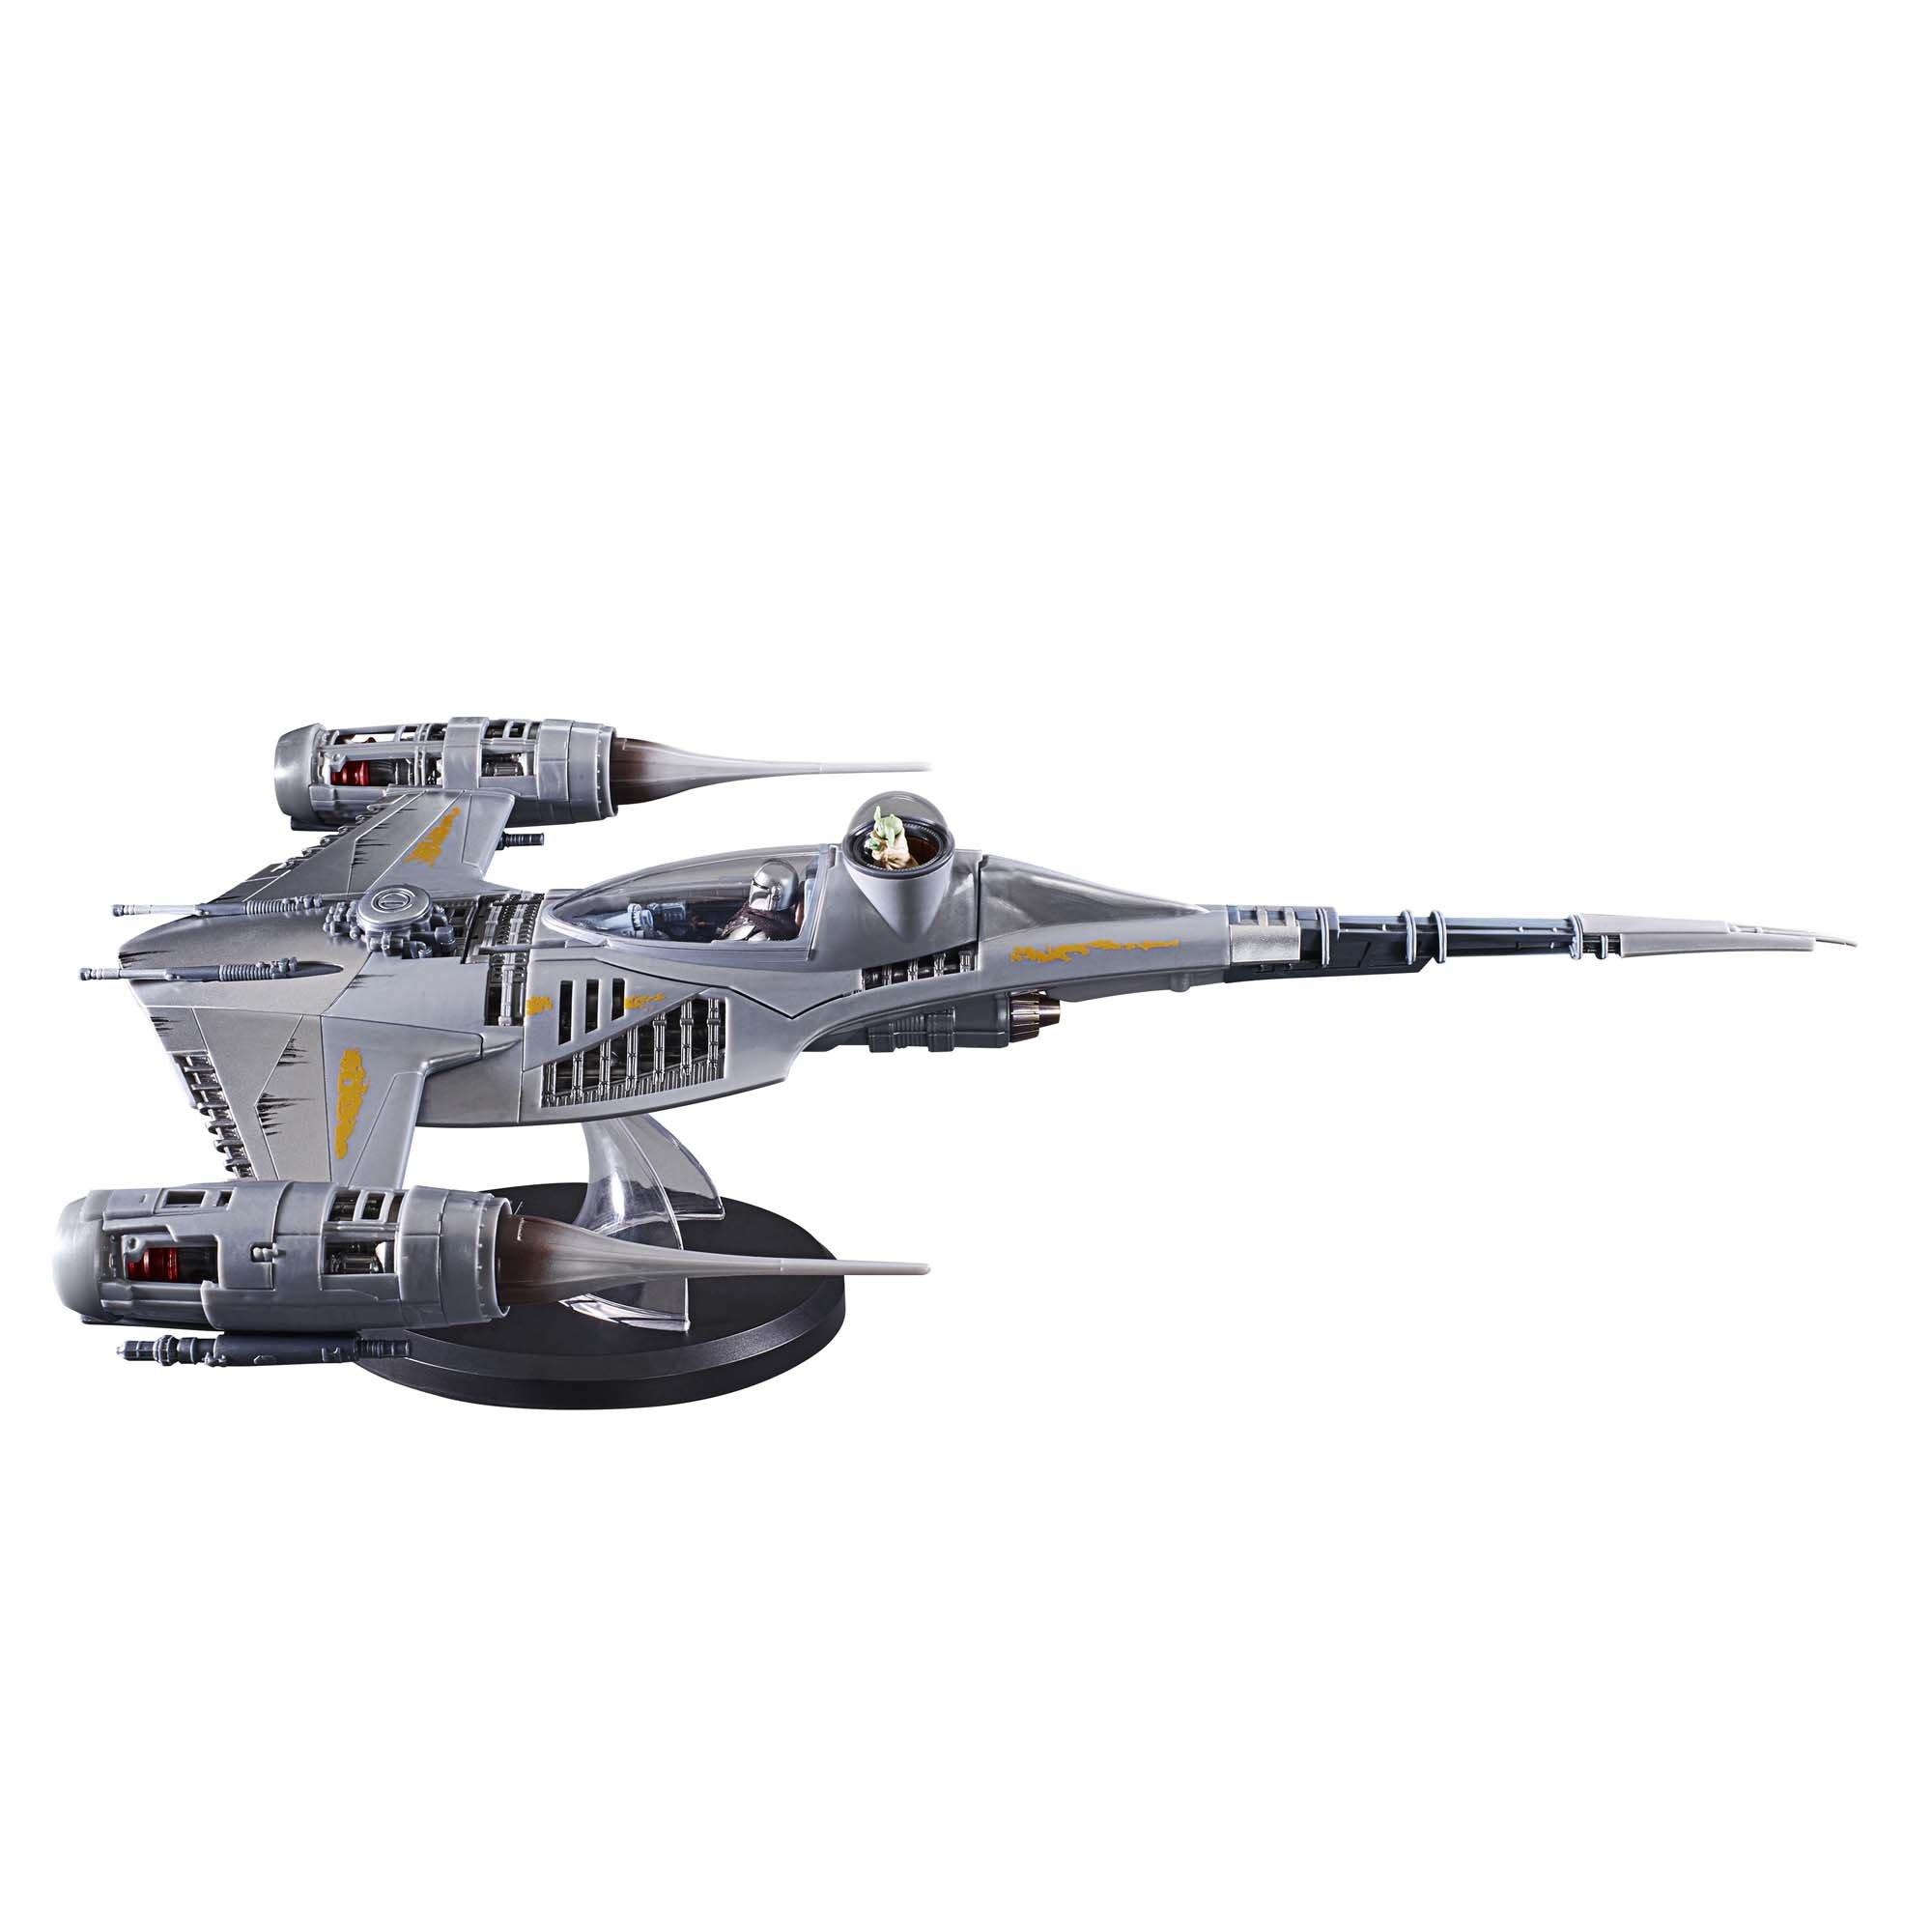 Hasbro Star Wars: The Vintage Collection The Mandalorian’s N-1 Starfighter and Madalorian 3.75-in Action Figure 2-Pack Set